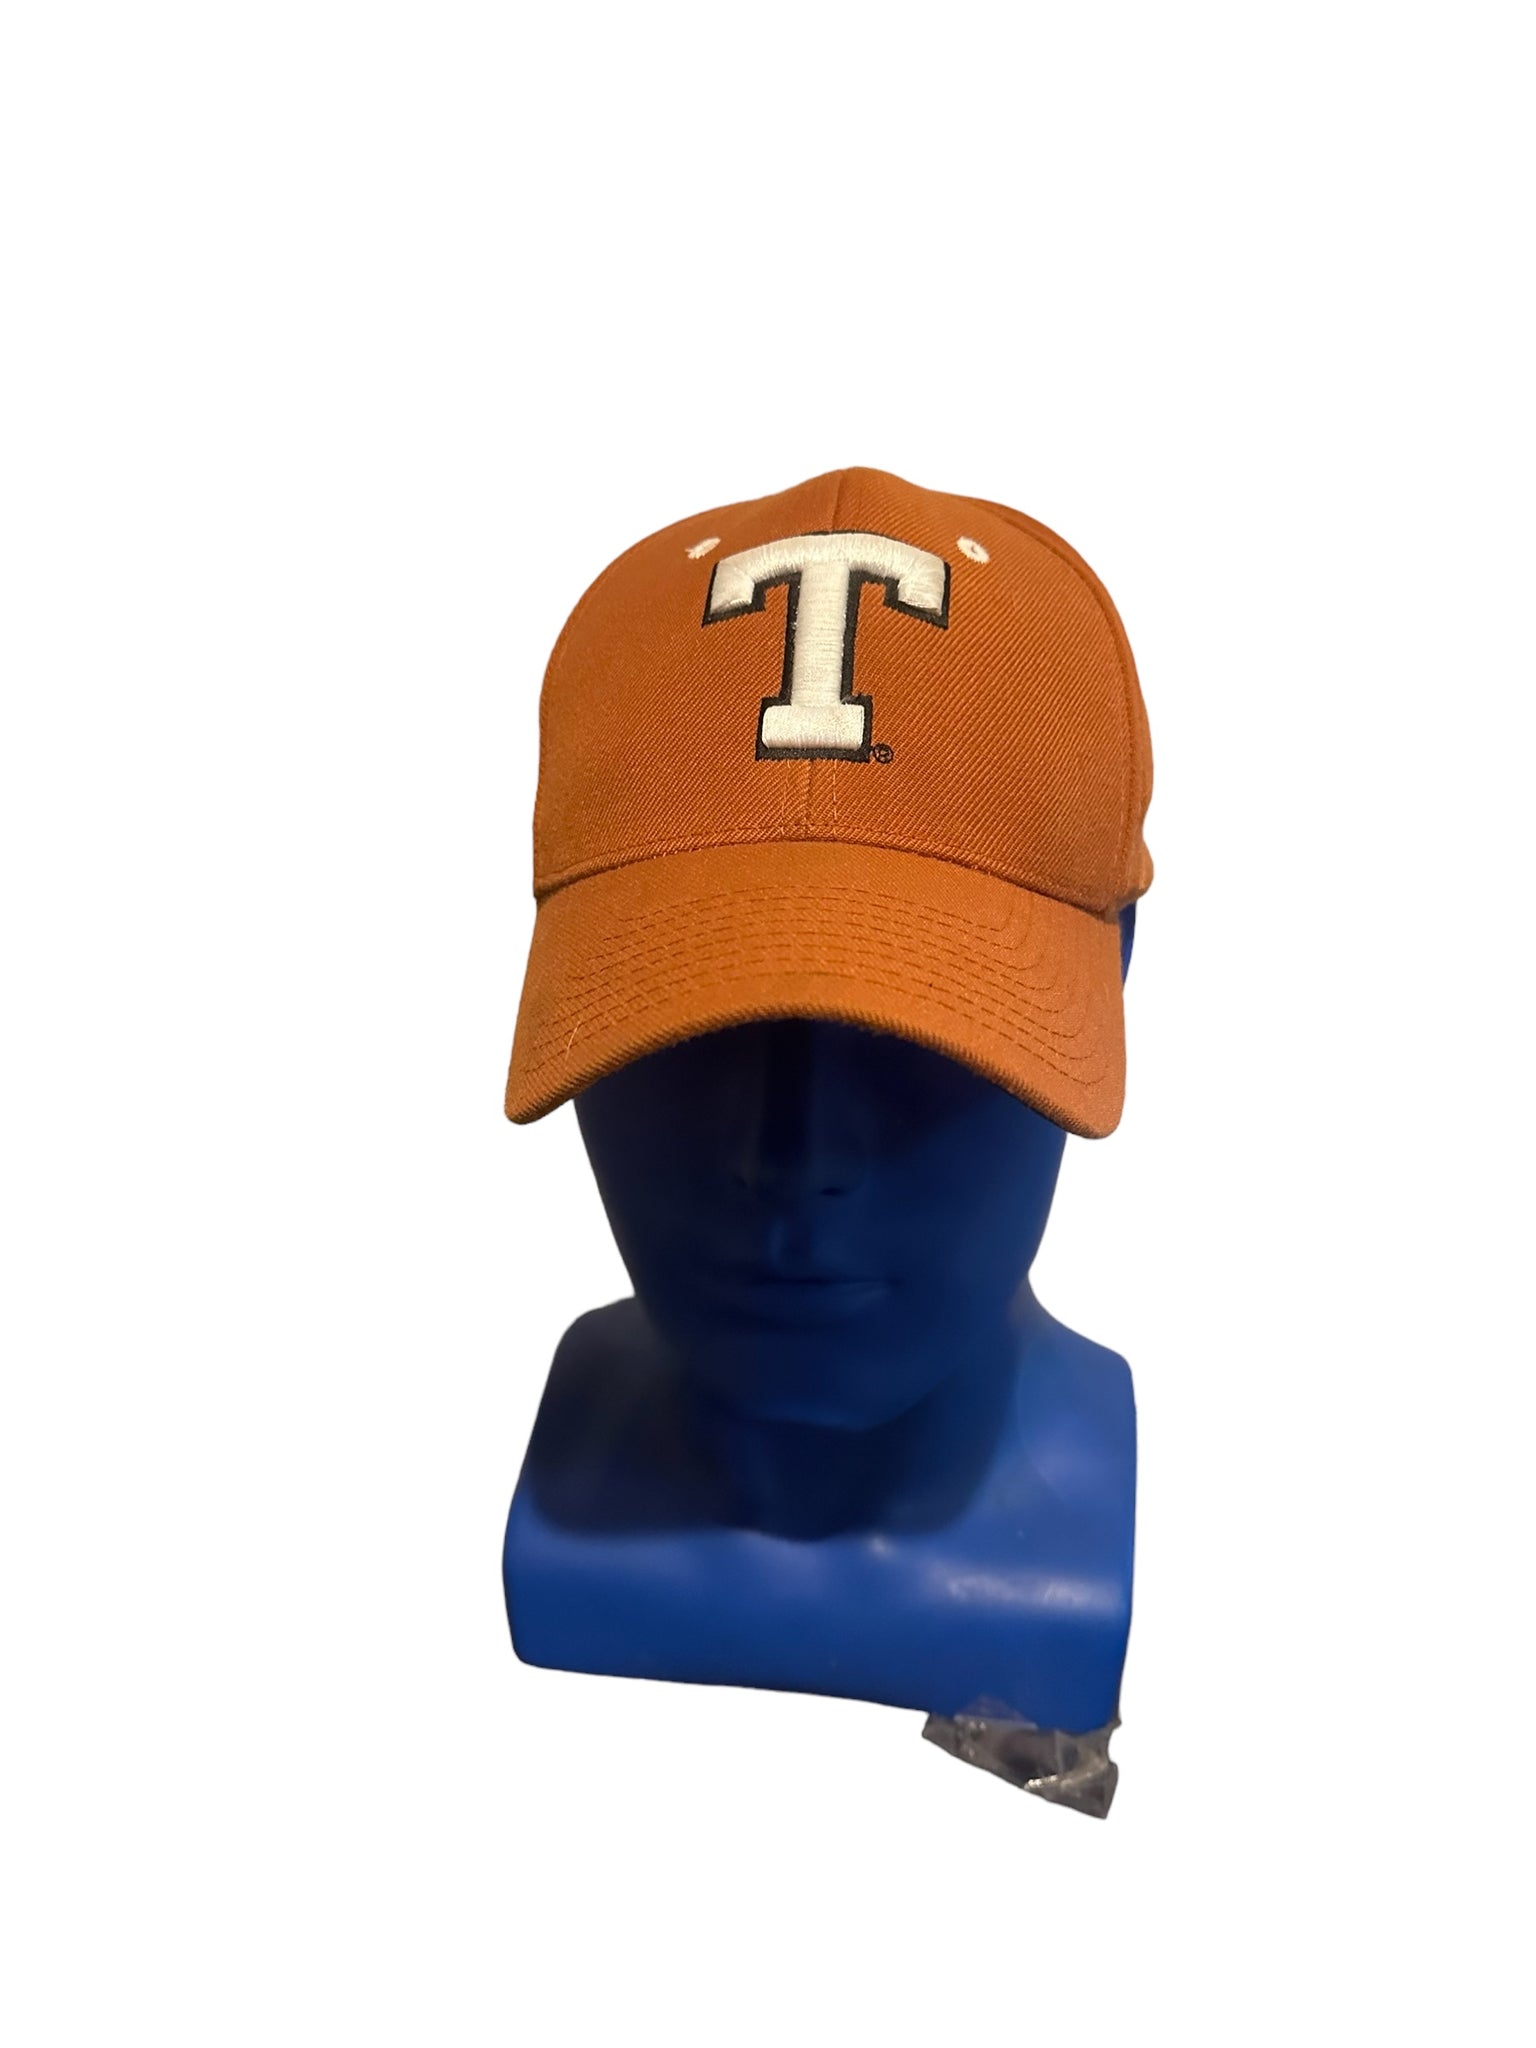 Texas Longhorns College Football Zephyr Fitted Hat Cap Size 7 1/8